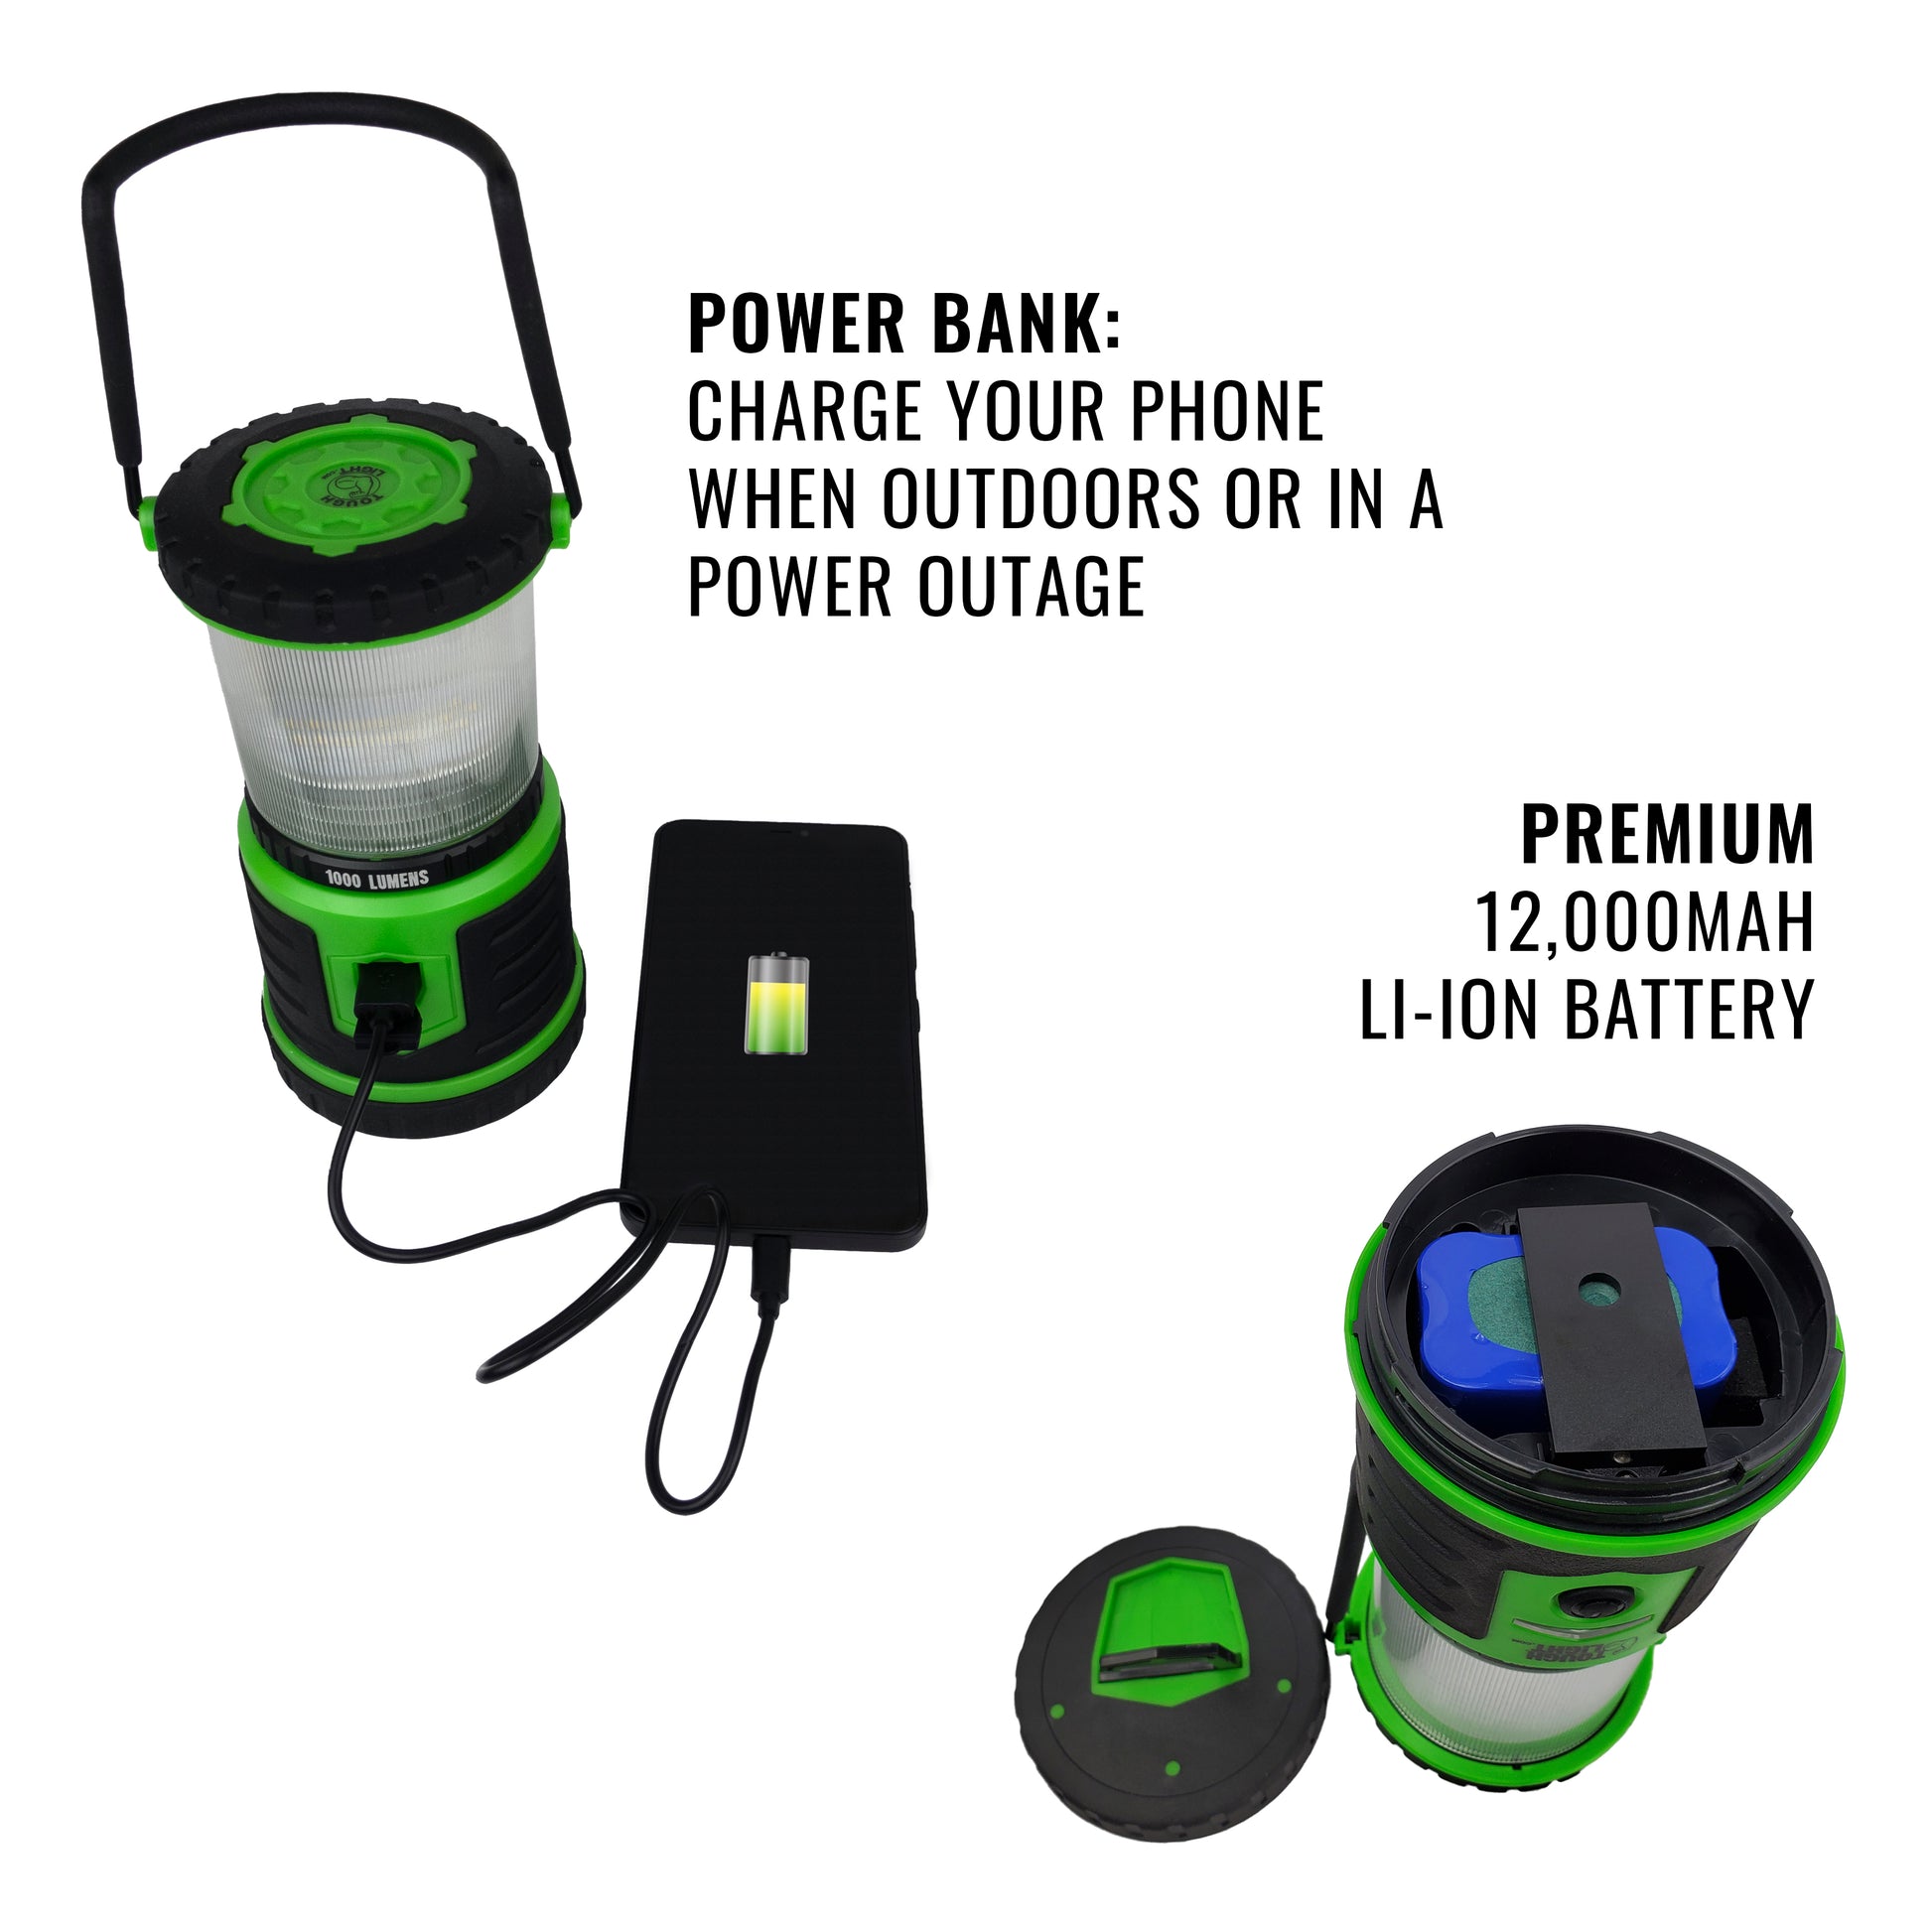 Tough Light LED Rechargeable Lantern - 200 Hours of Light Plus a Phone  Charger for Hurricane, Emergency or Camping, Long Lasting Battery- Free 2  Year